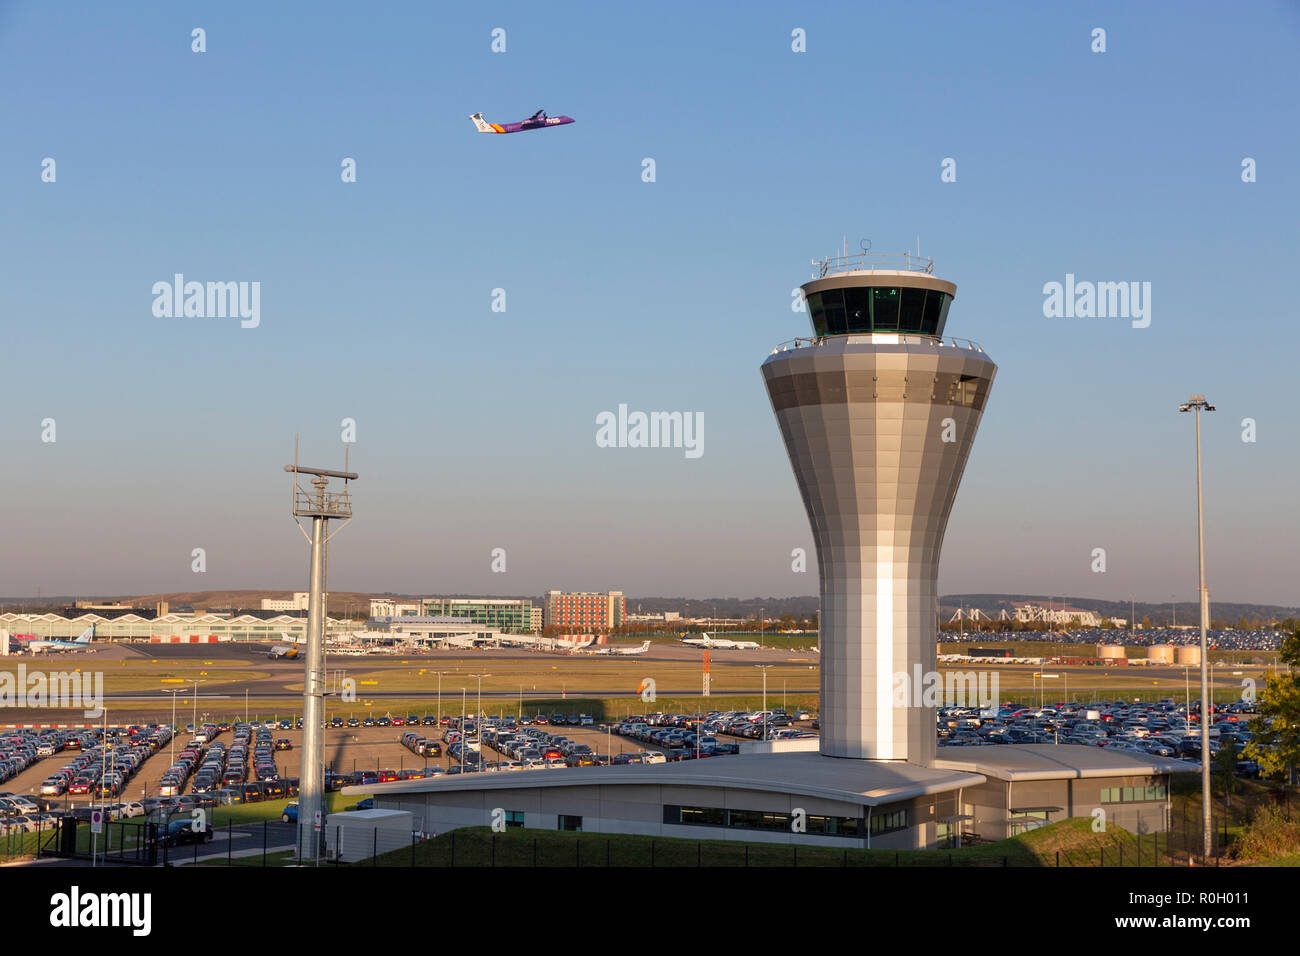 BIRMINGHAM, UK - OCTOBER 17, 2018: General wide view of Birmingham Airport in the Midlands, England with a Flybe aircraft passing the distinctive, met Stock Photo